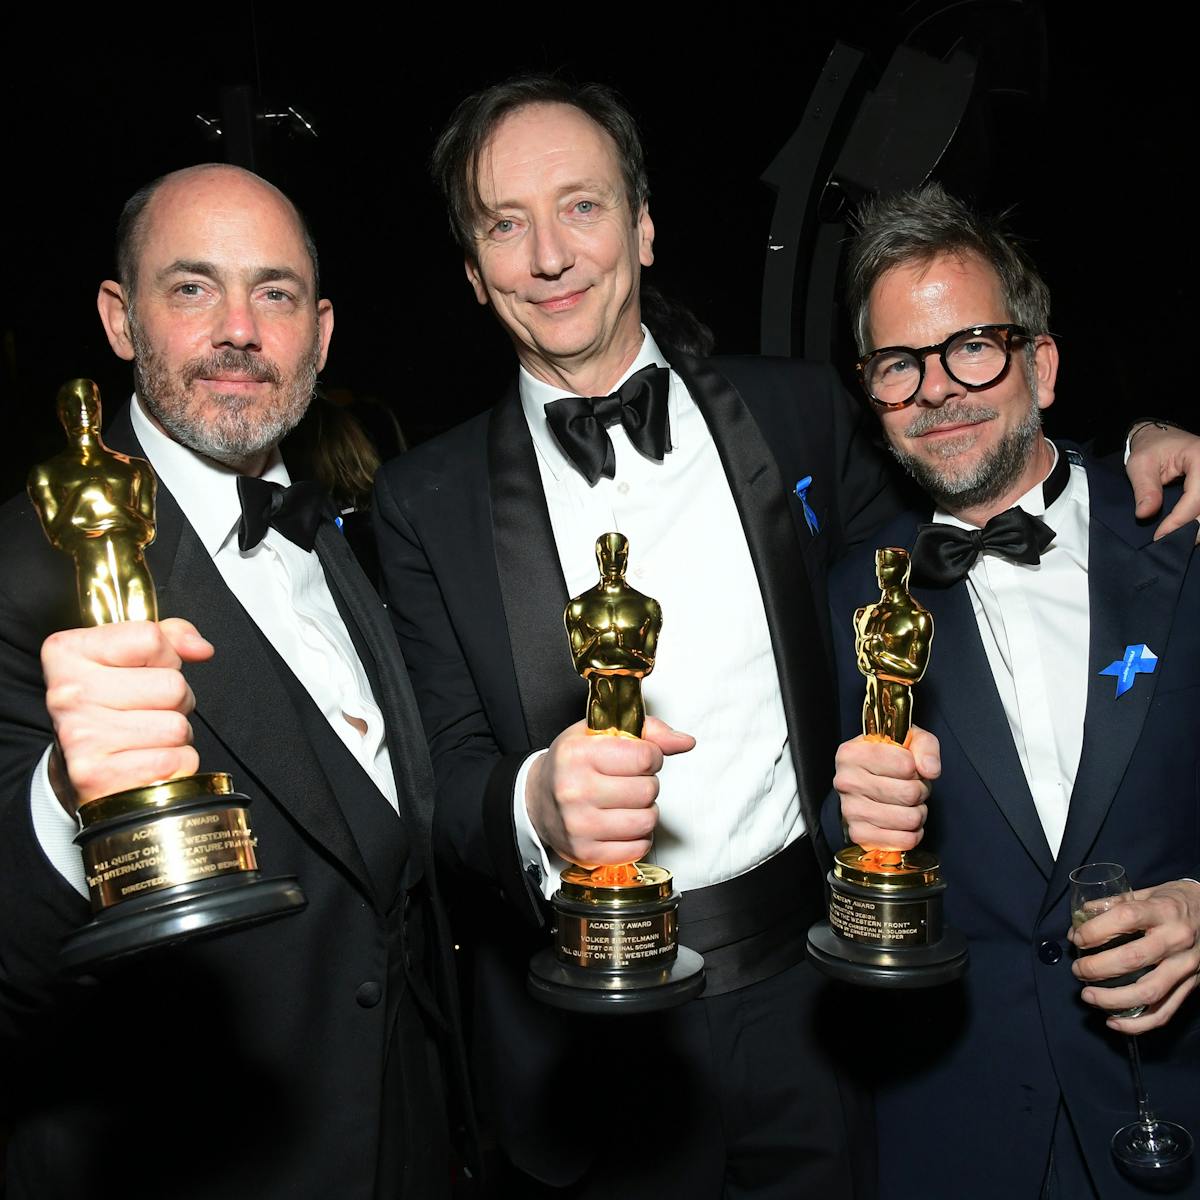 Edward Berger, Volker Bertelmann and Christian Goldbeck attend Netflix's Oscar Gathering at Pendry West Hollywood on March 12, 2023 in West Hollywood, California.